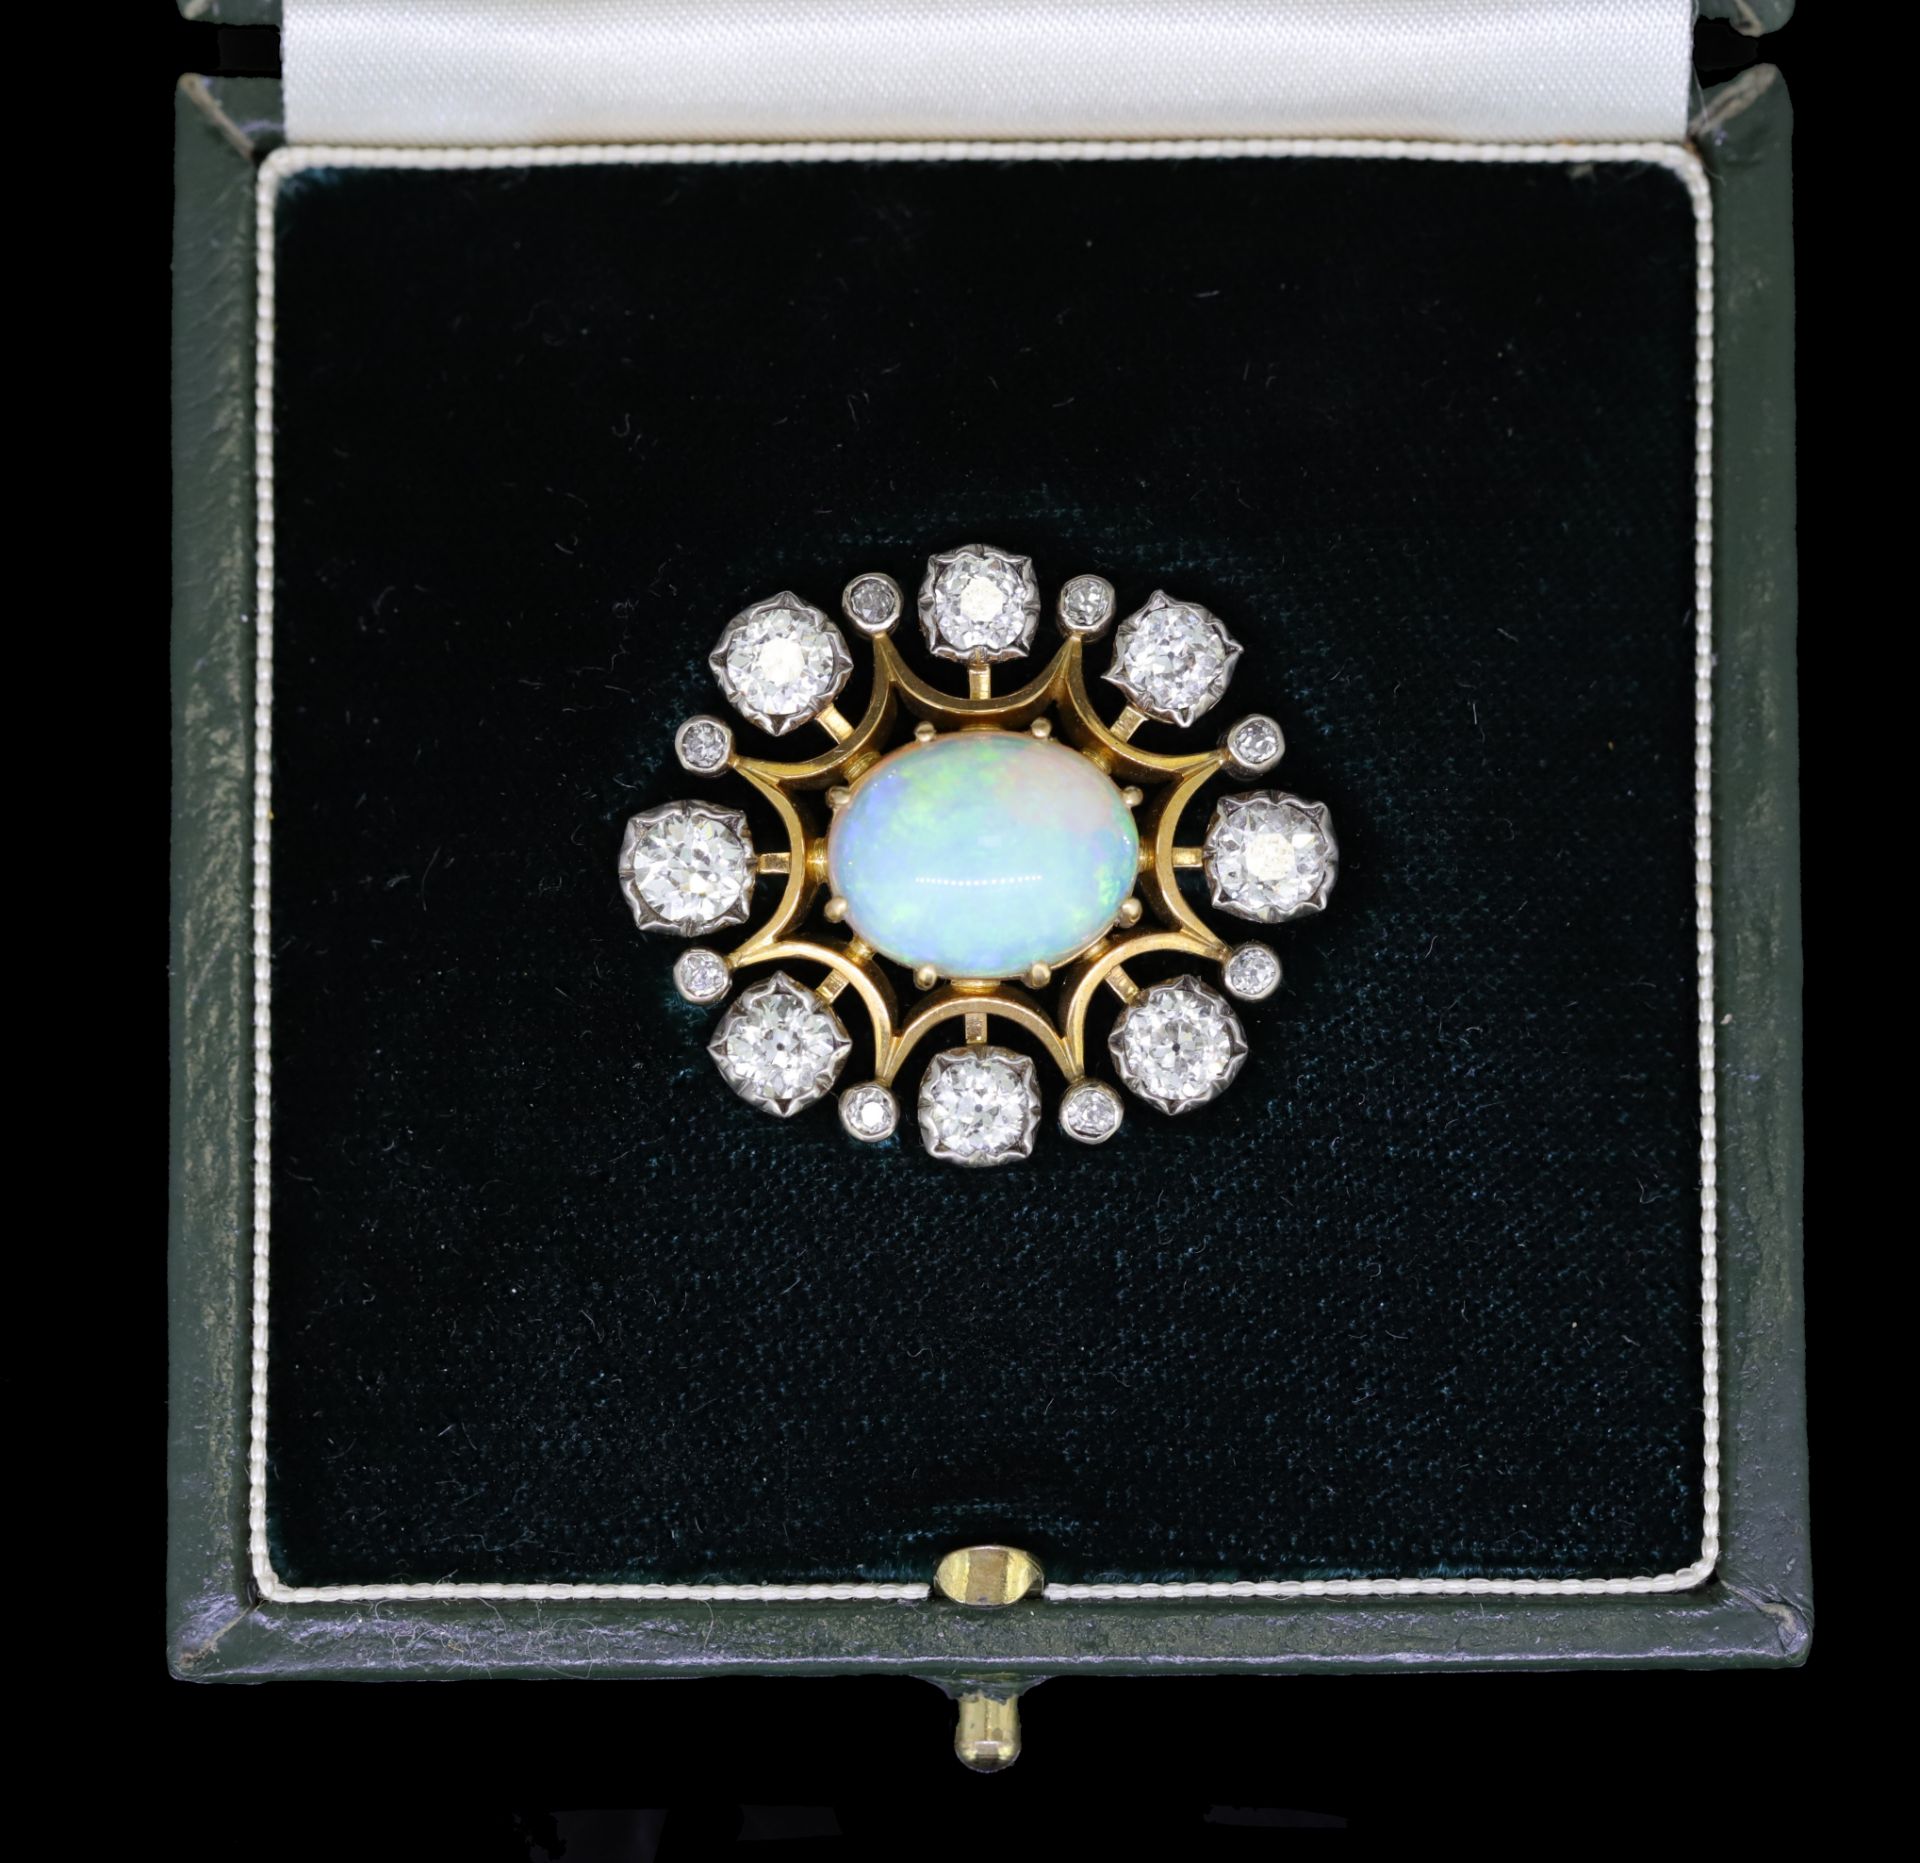 ANTIQUE OPAL AND DIAMOND BROOCH - Image 4 of 4